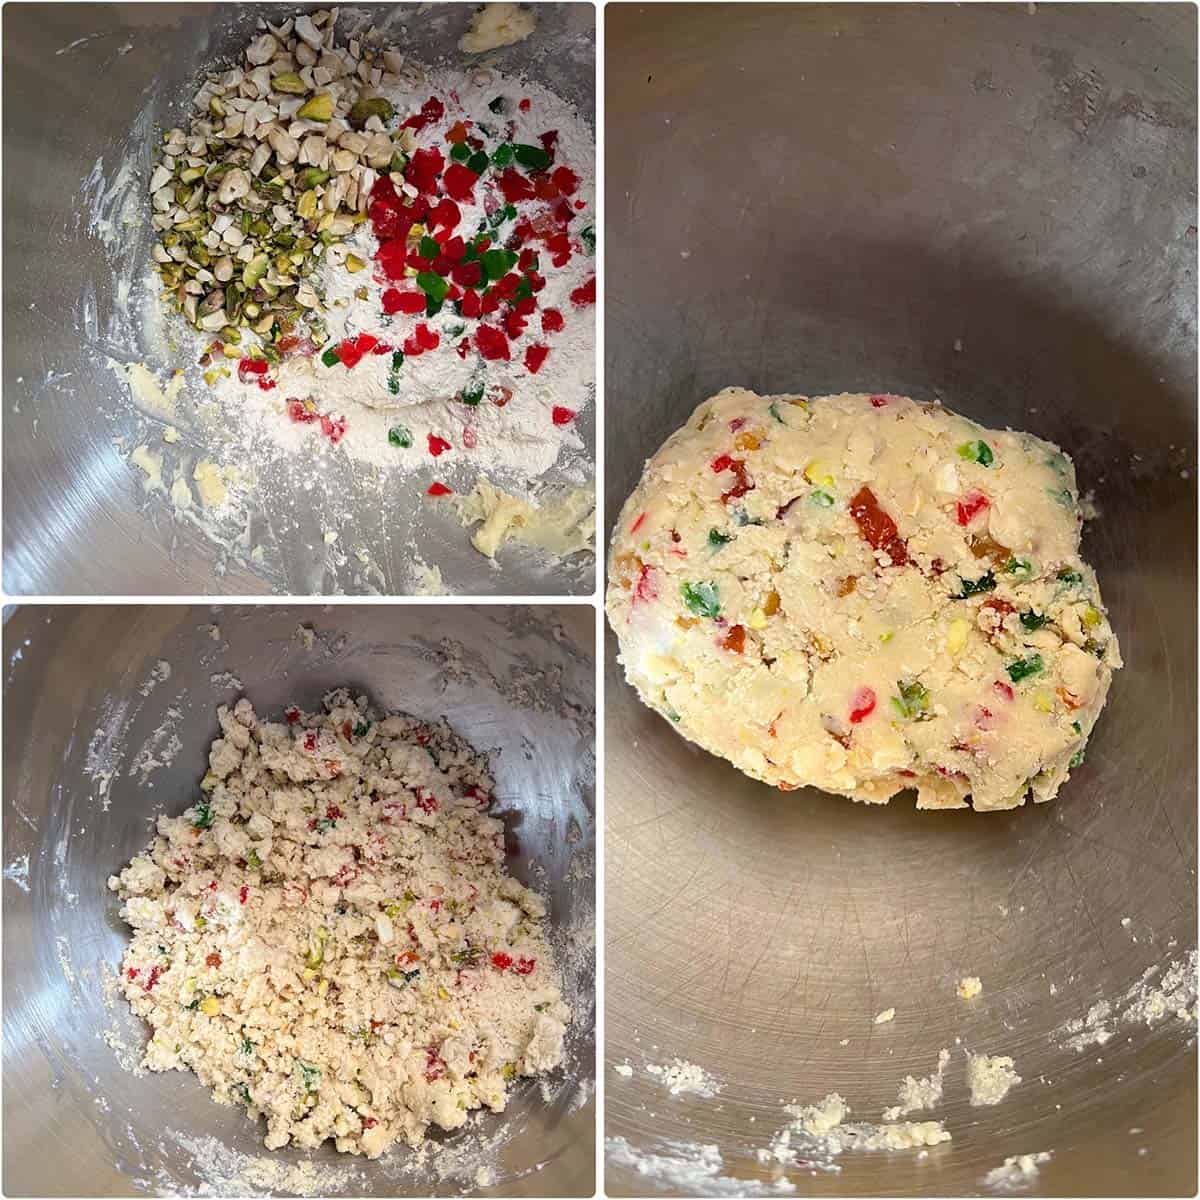 3 panel photo showing the addition of flour and tutti frutti to make the dough.